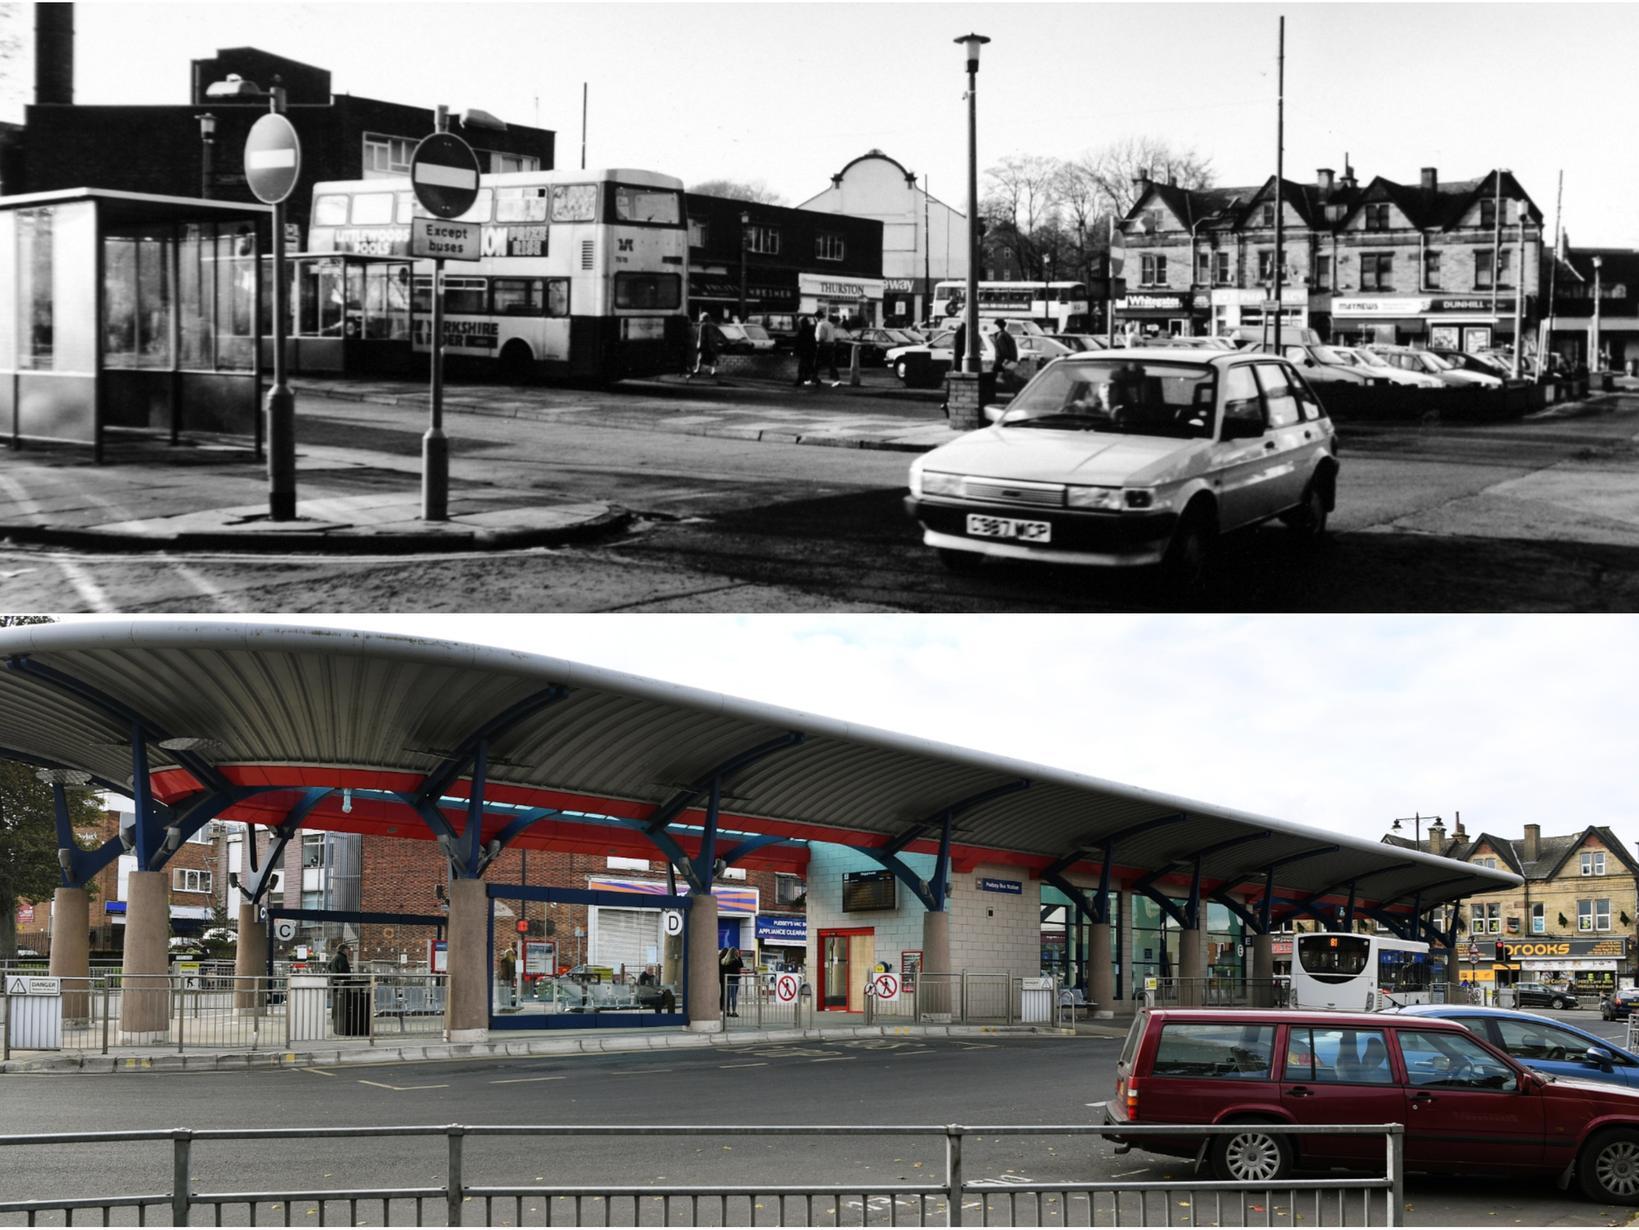 The Market Place in 1989 and in 2019.